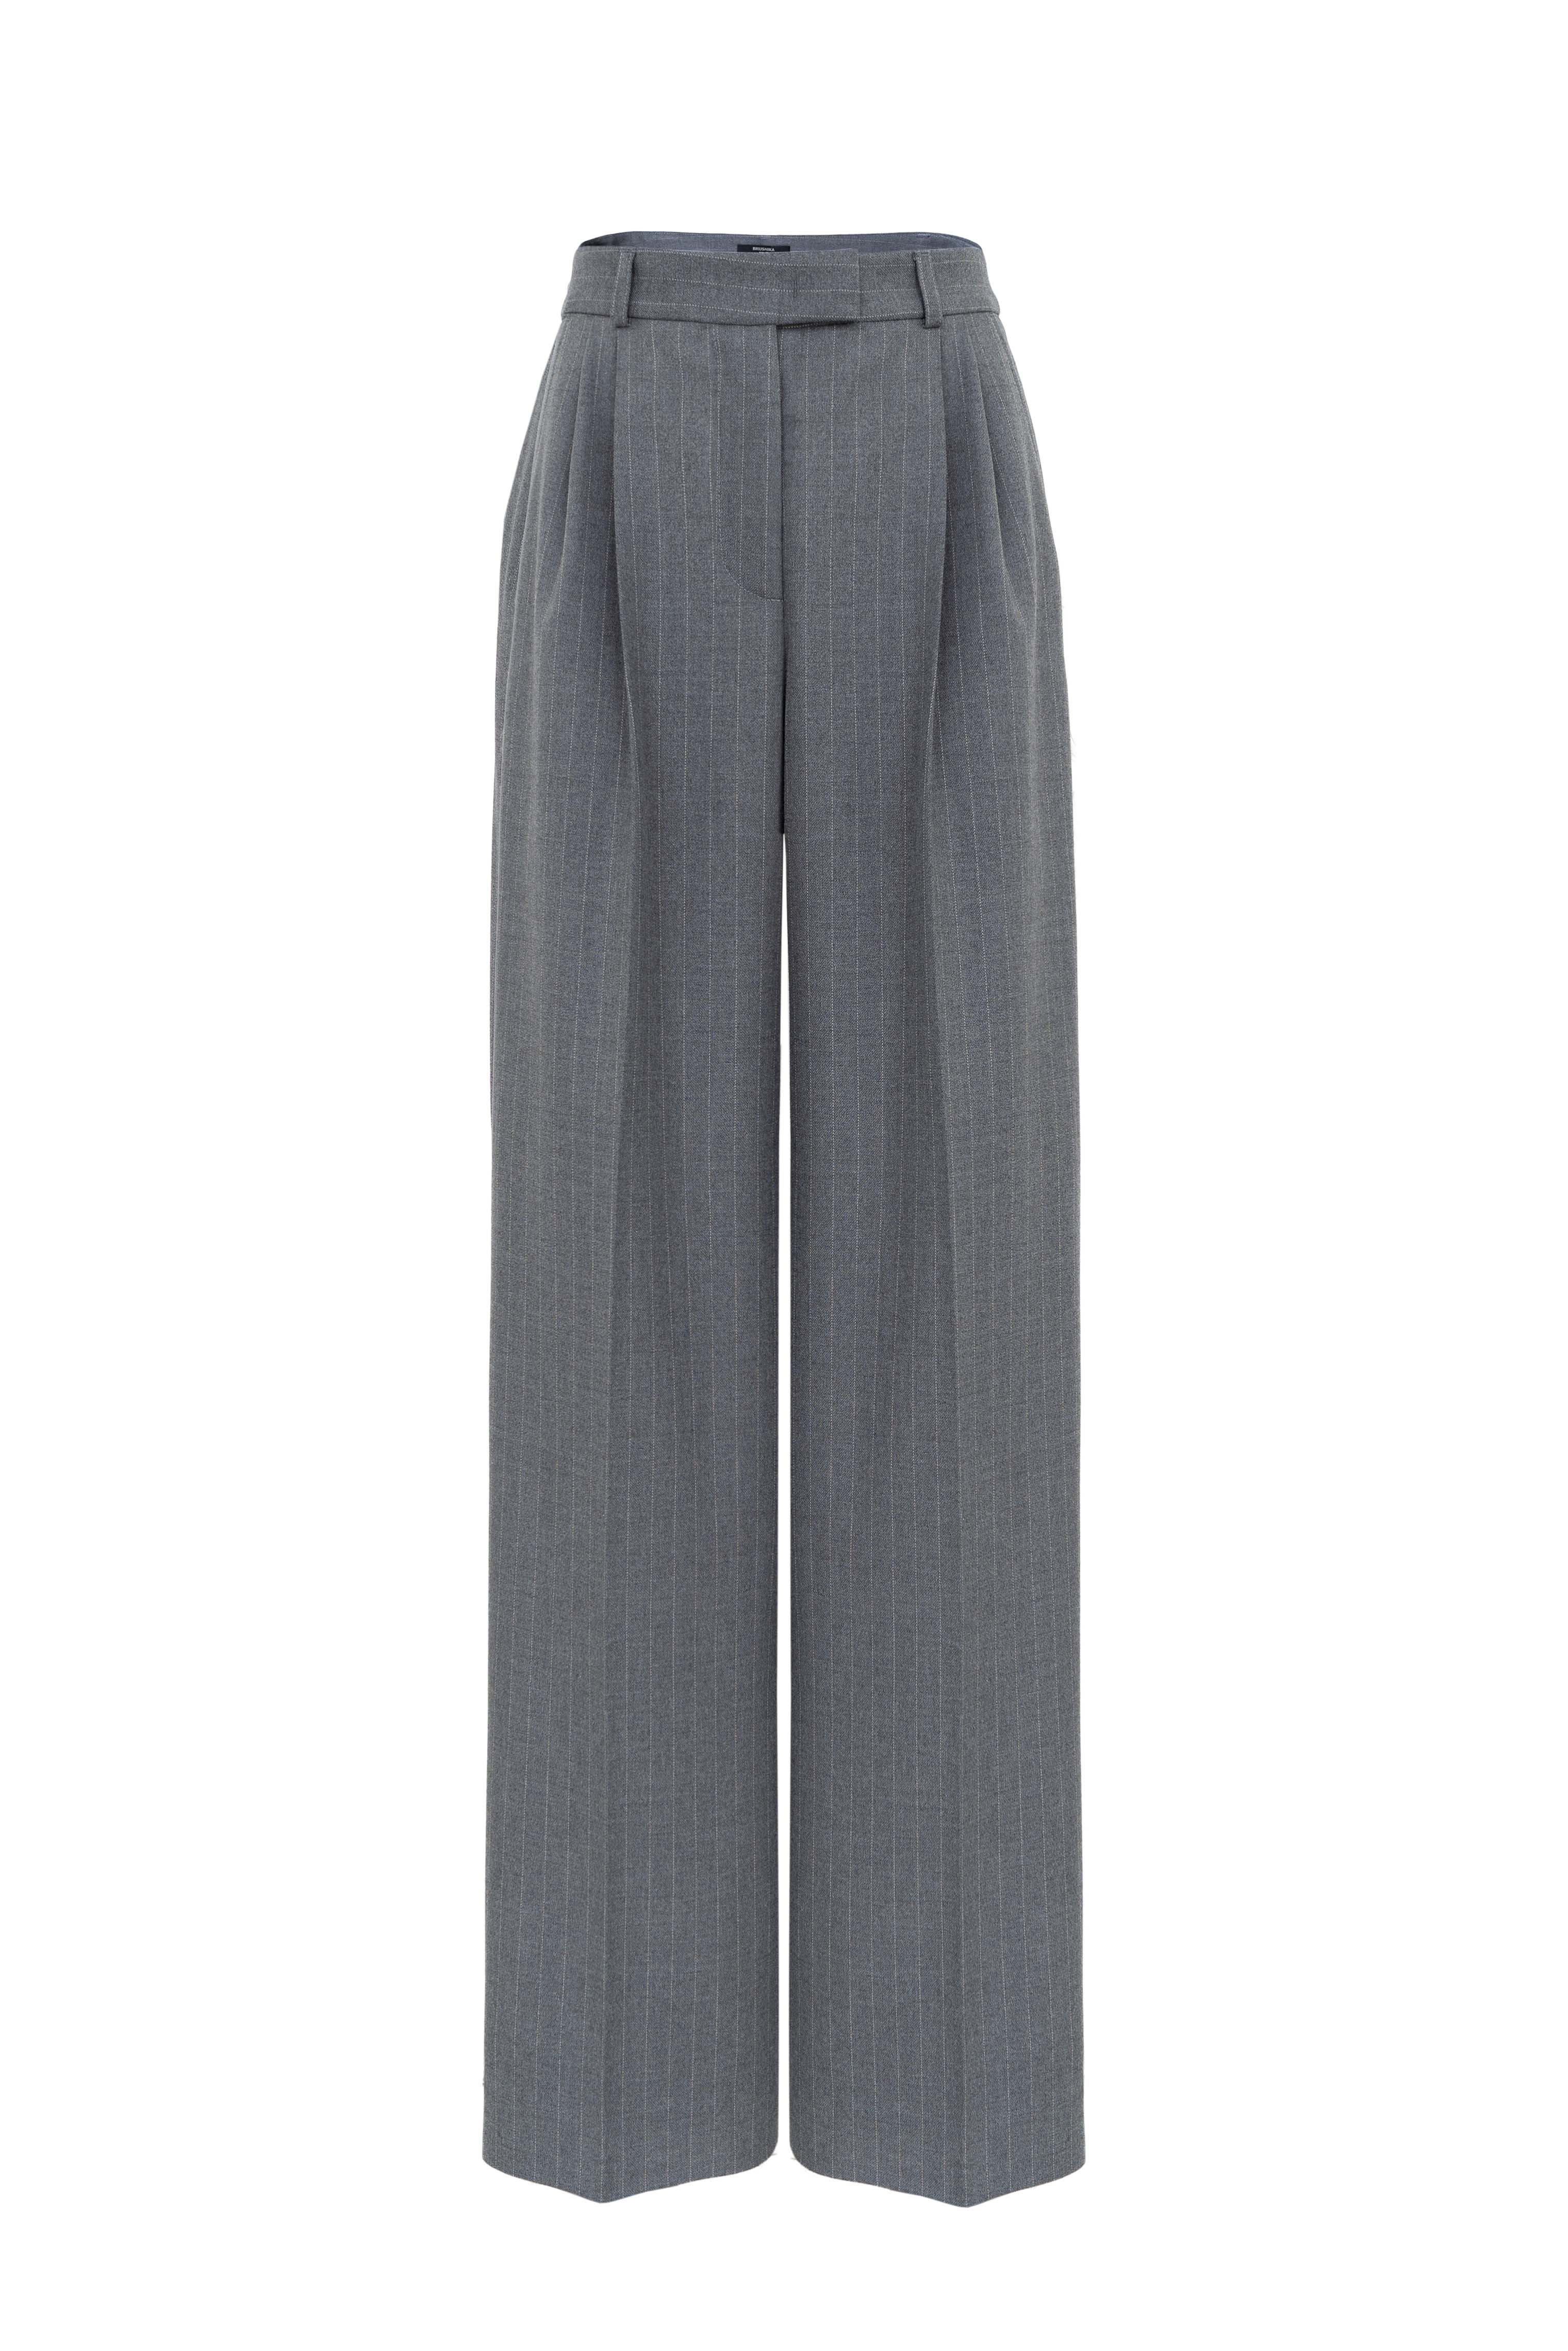 Trousers 4783-04 Grey from BRUSNiKA